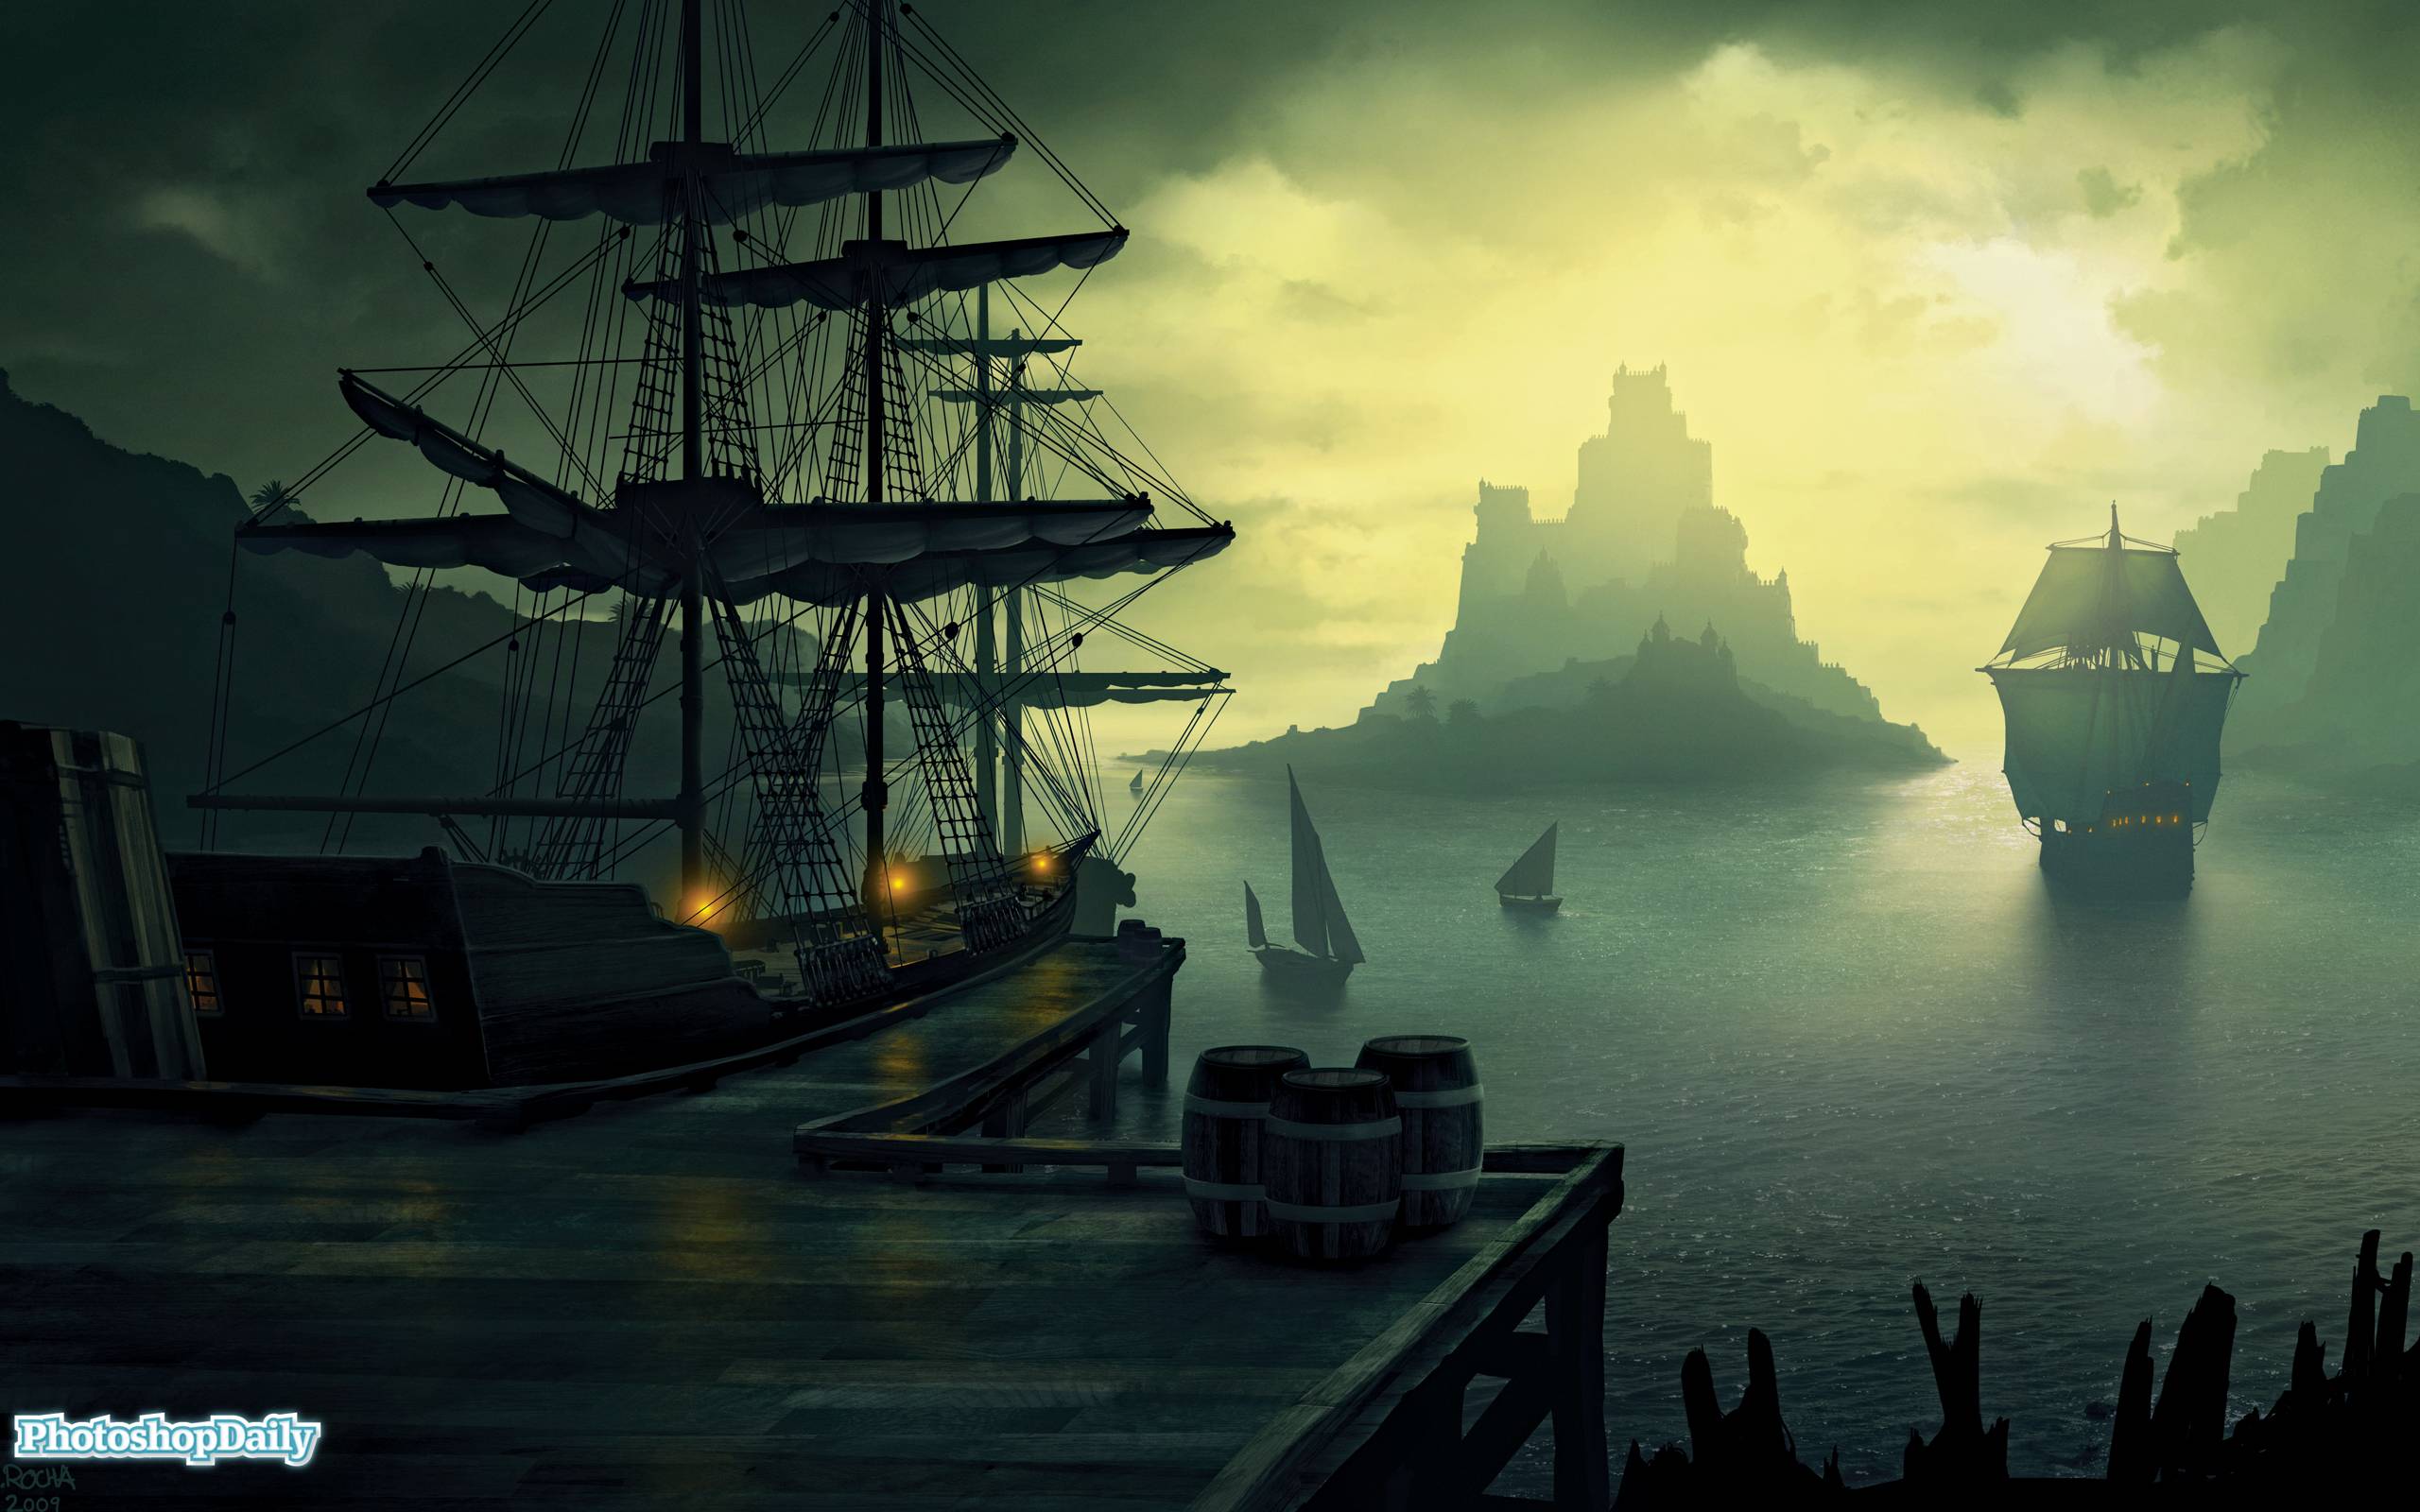 Pirate Ship Background For Your Desktop